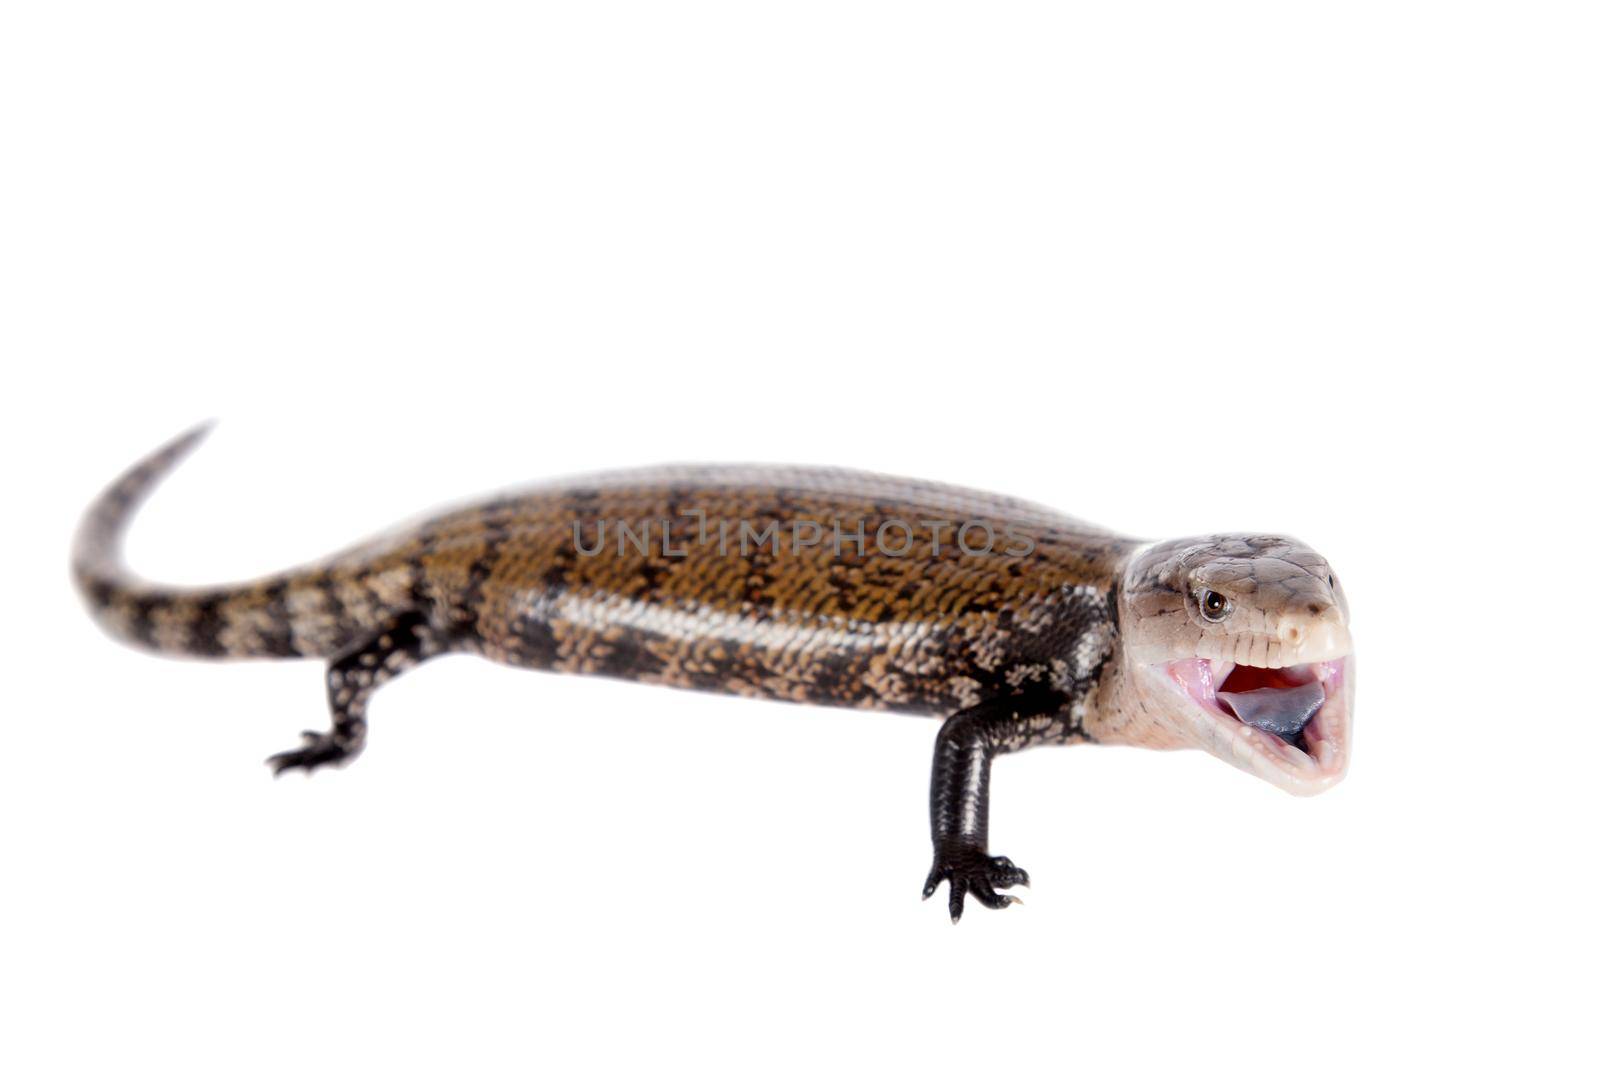 Eastern Blue-tongued Skink on white by RosaJay